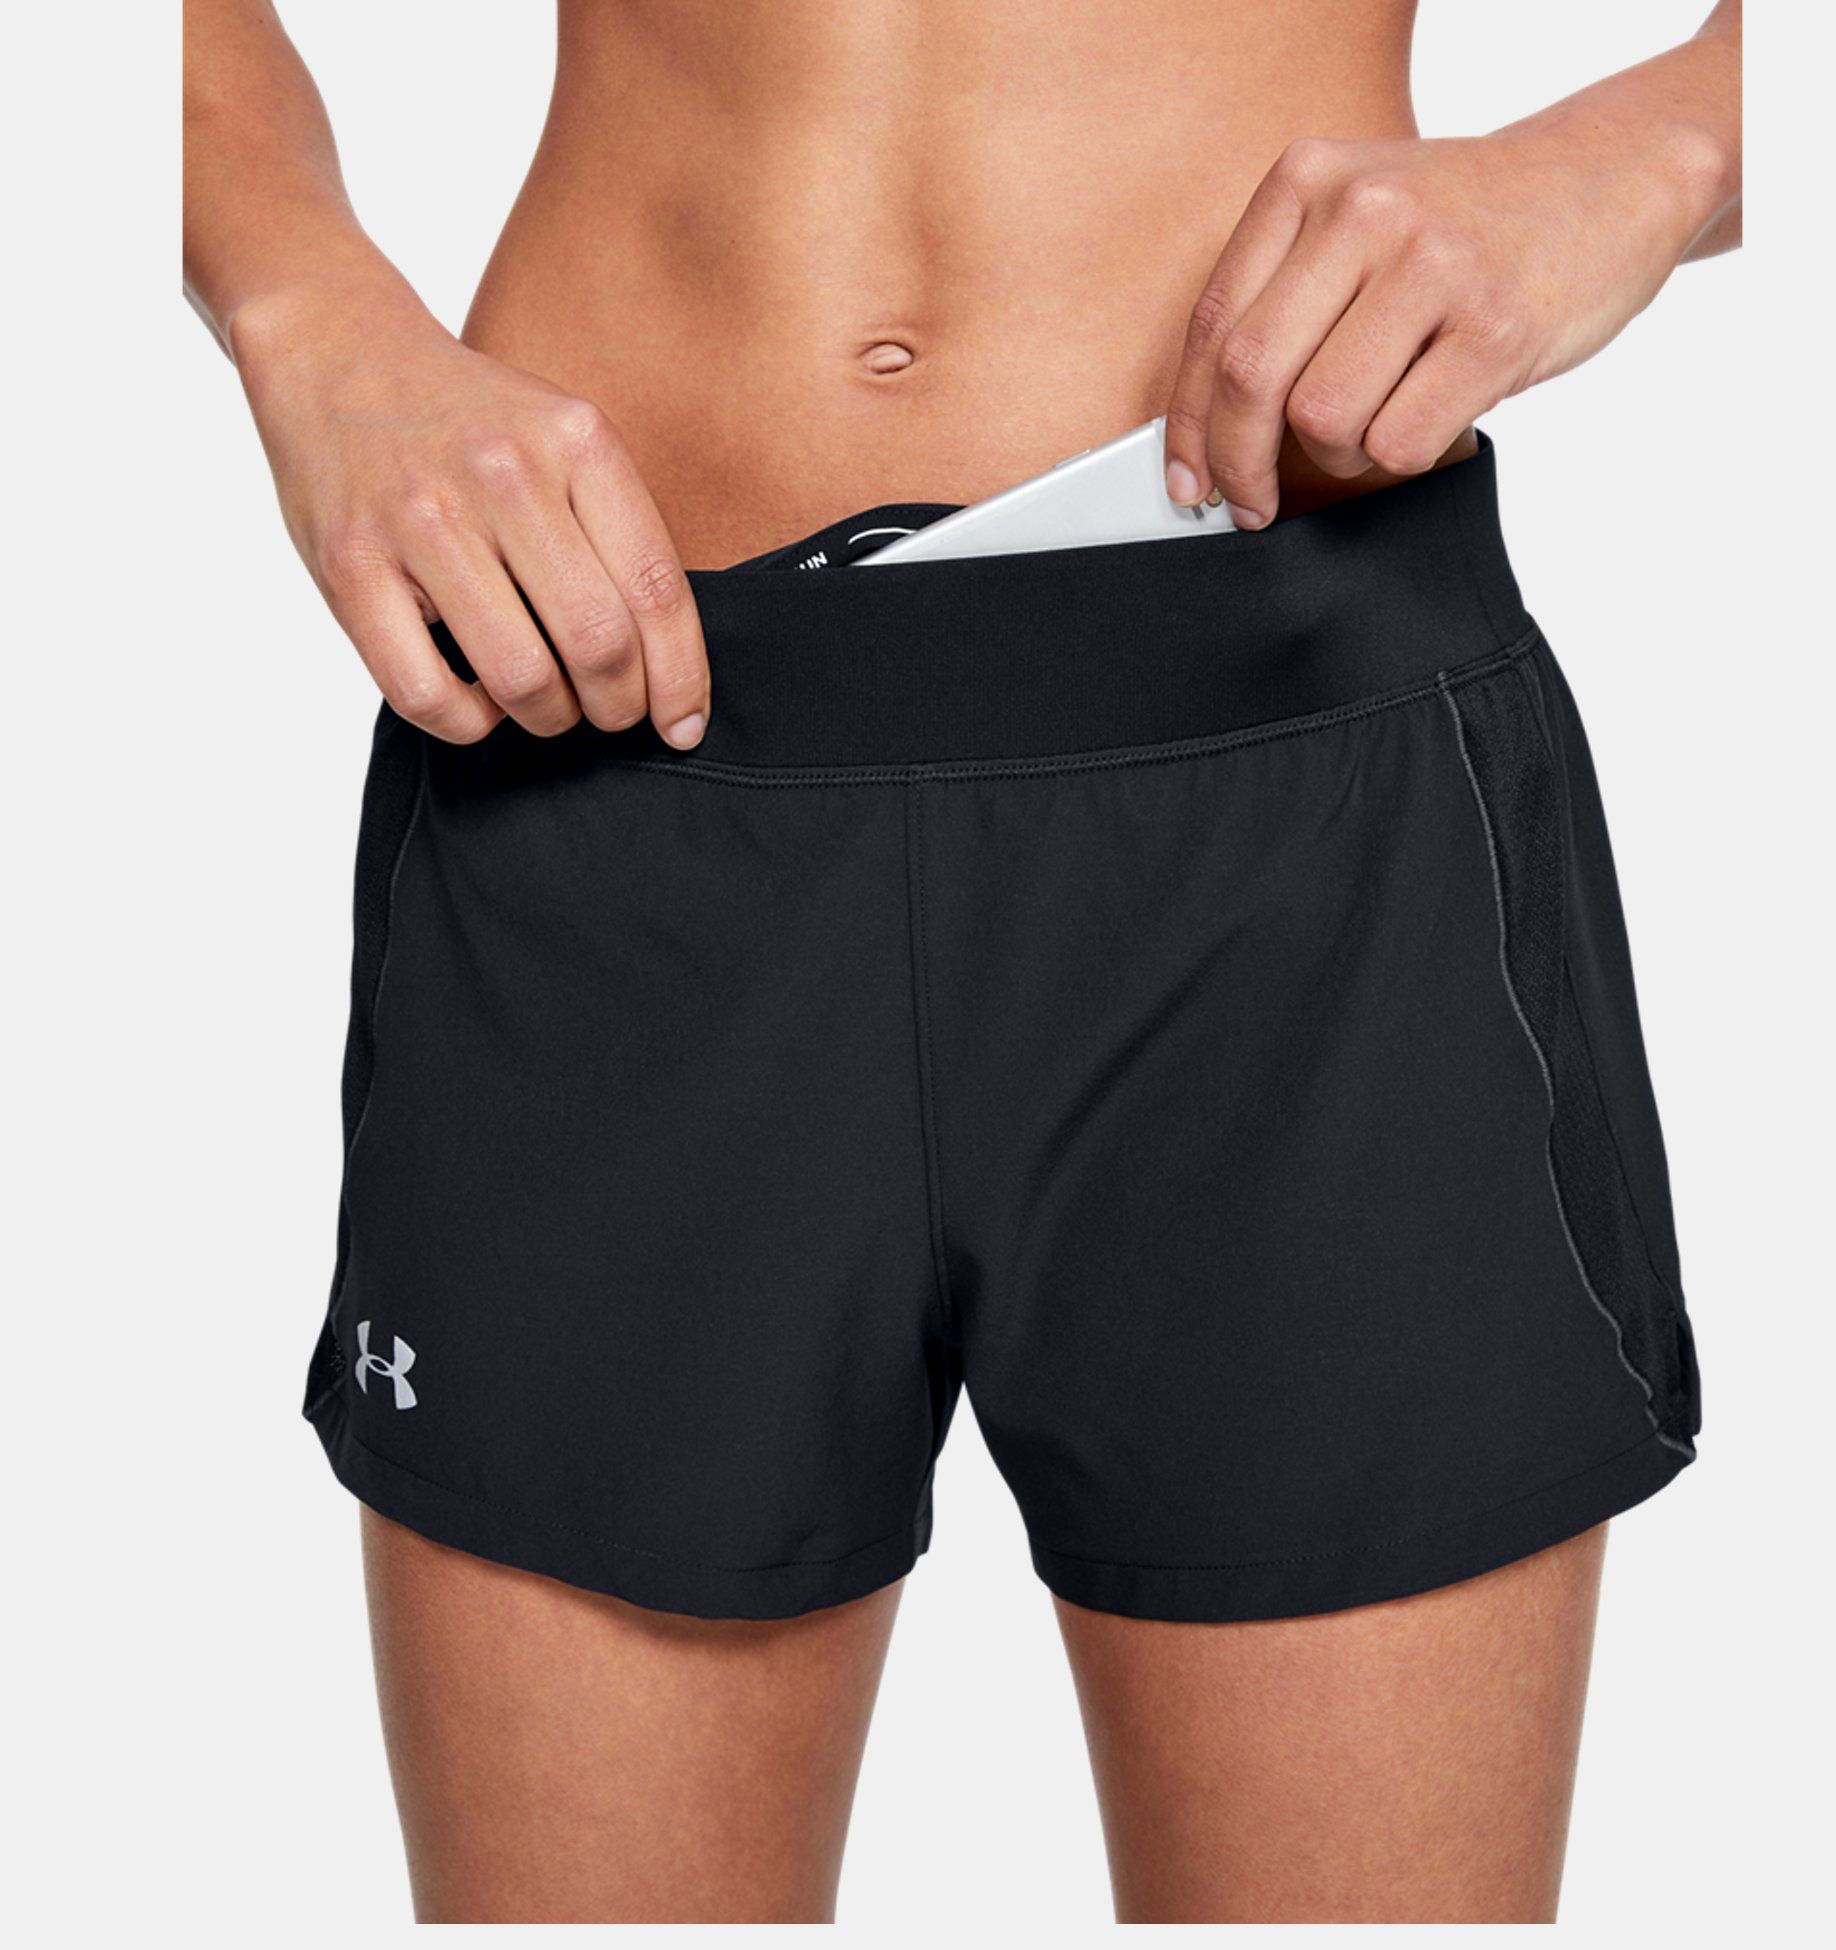 nike womens running shorts with pockets